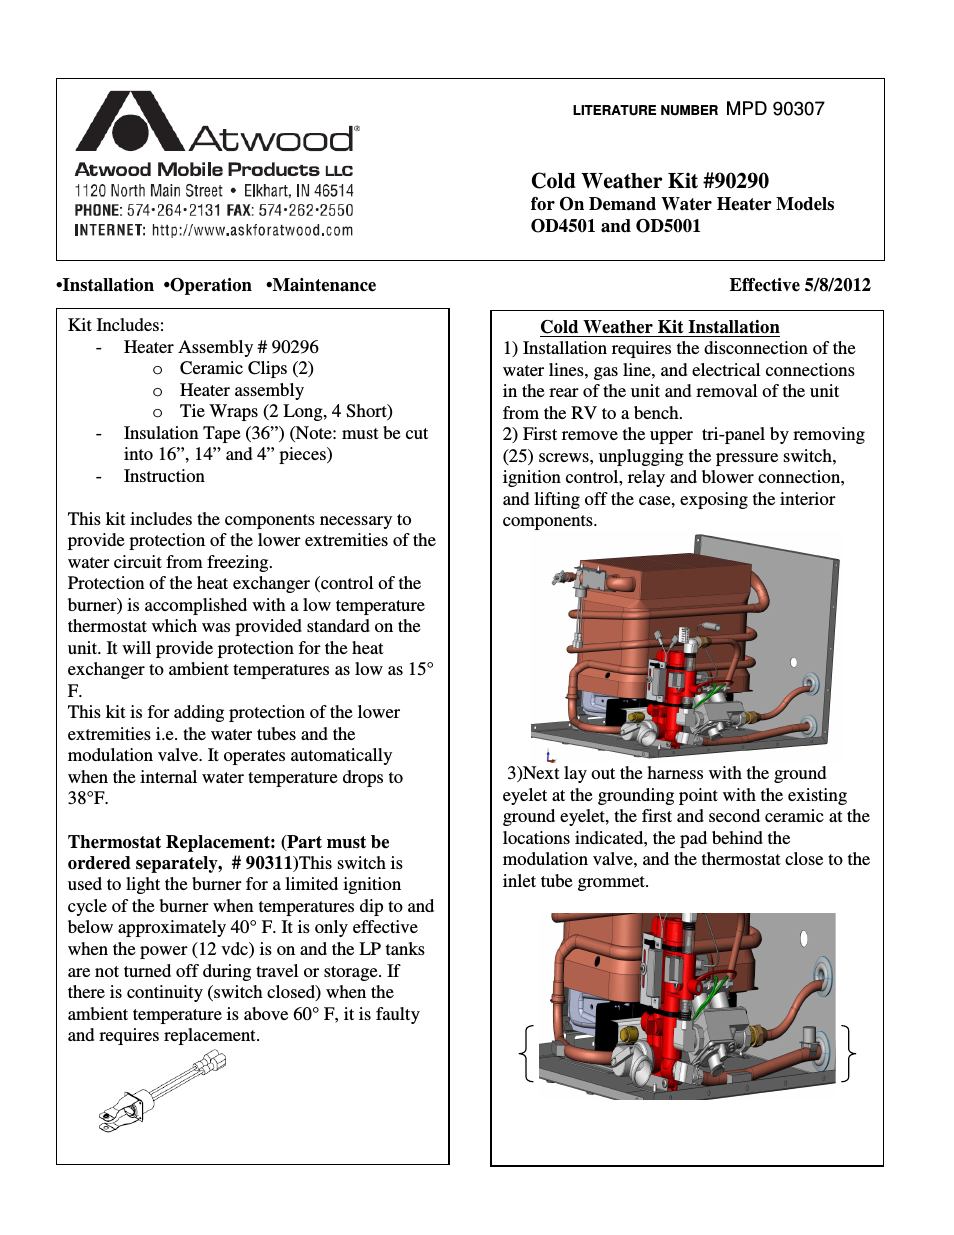 Water Heater Parts Diagram Atwood Water Heater Parts Diagram New Atwood Water Heater